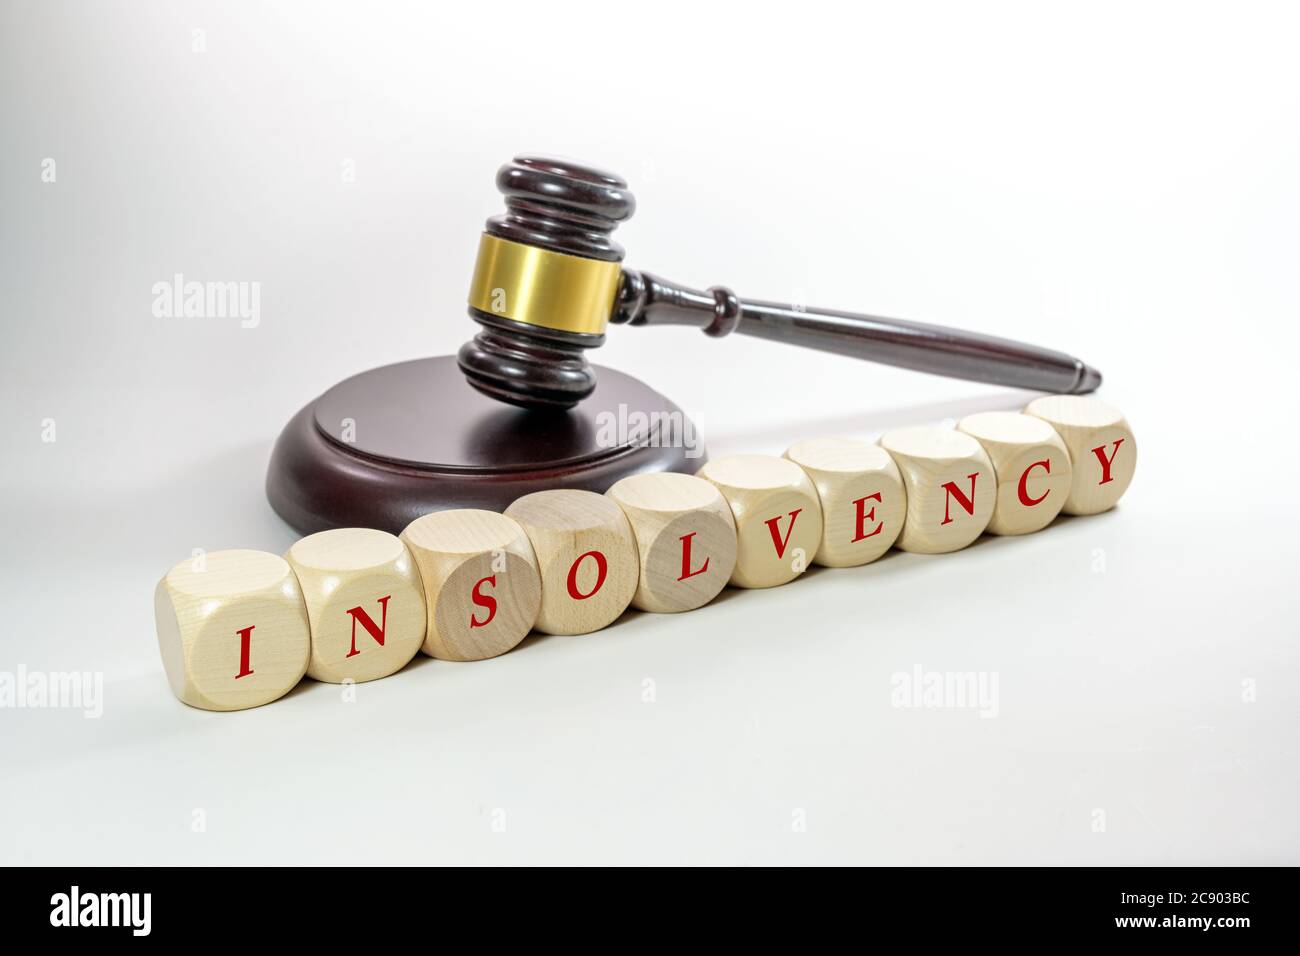 Judge gavel and wooden dices with the word Insolvency, some companies have to close after the coronavirus crisis, gray background with copy space, sel Stock Photo